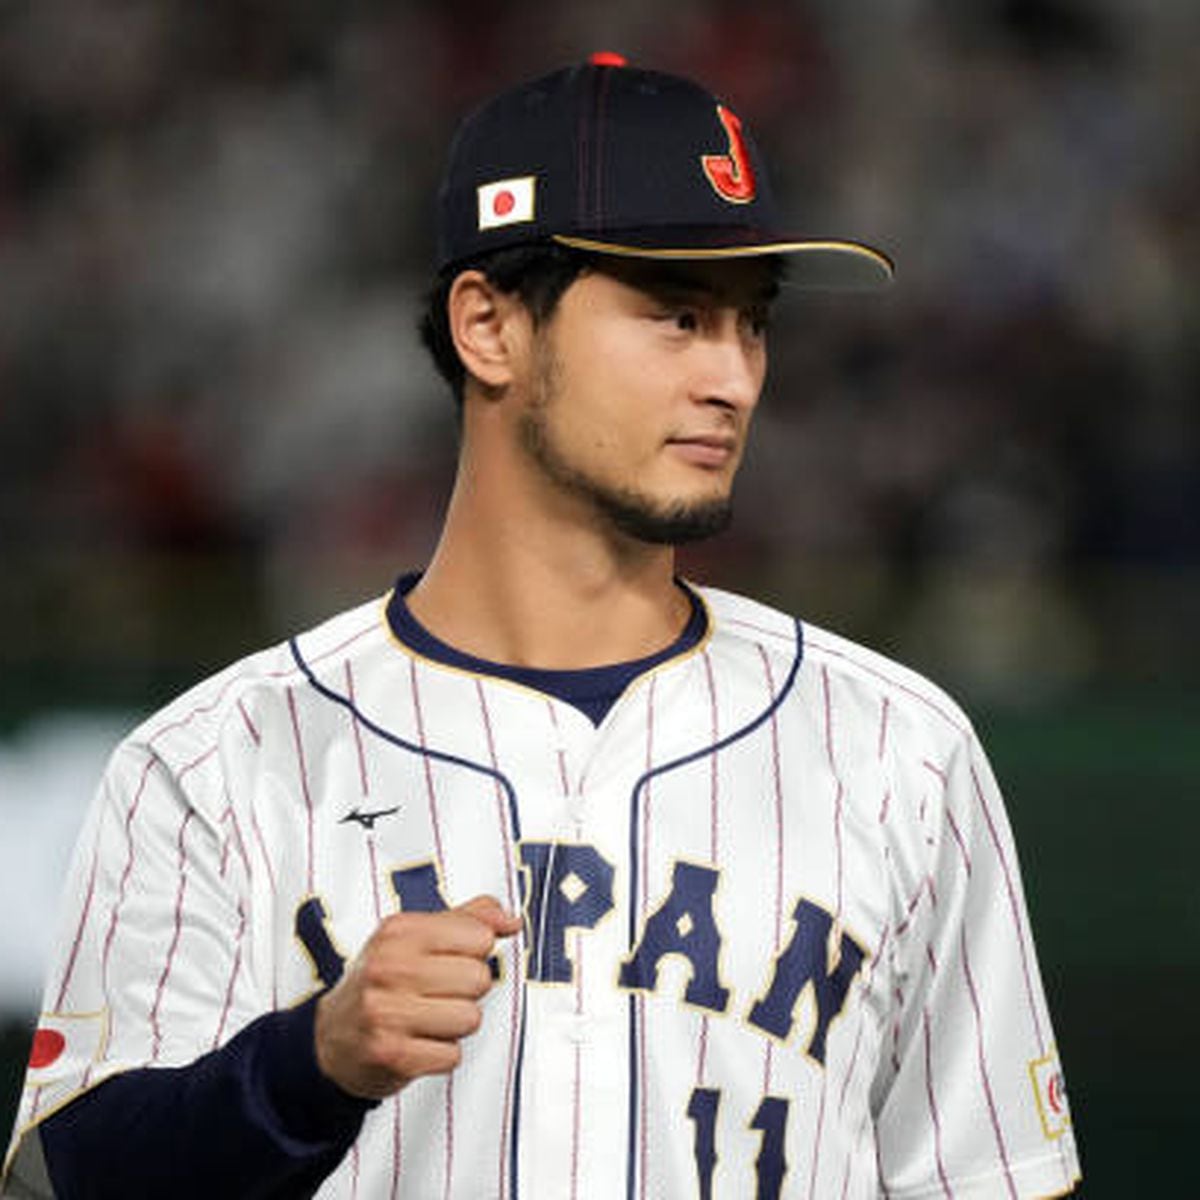 Baseball: Yu Darvish named Opening Day pitcher for 2nd straight year